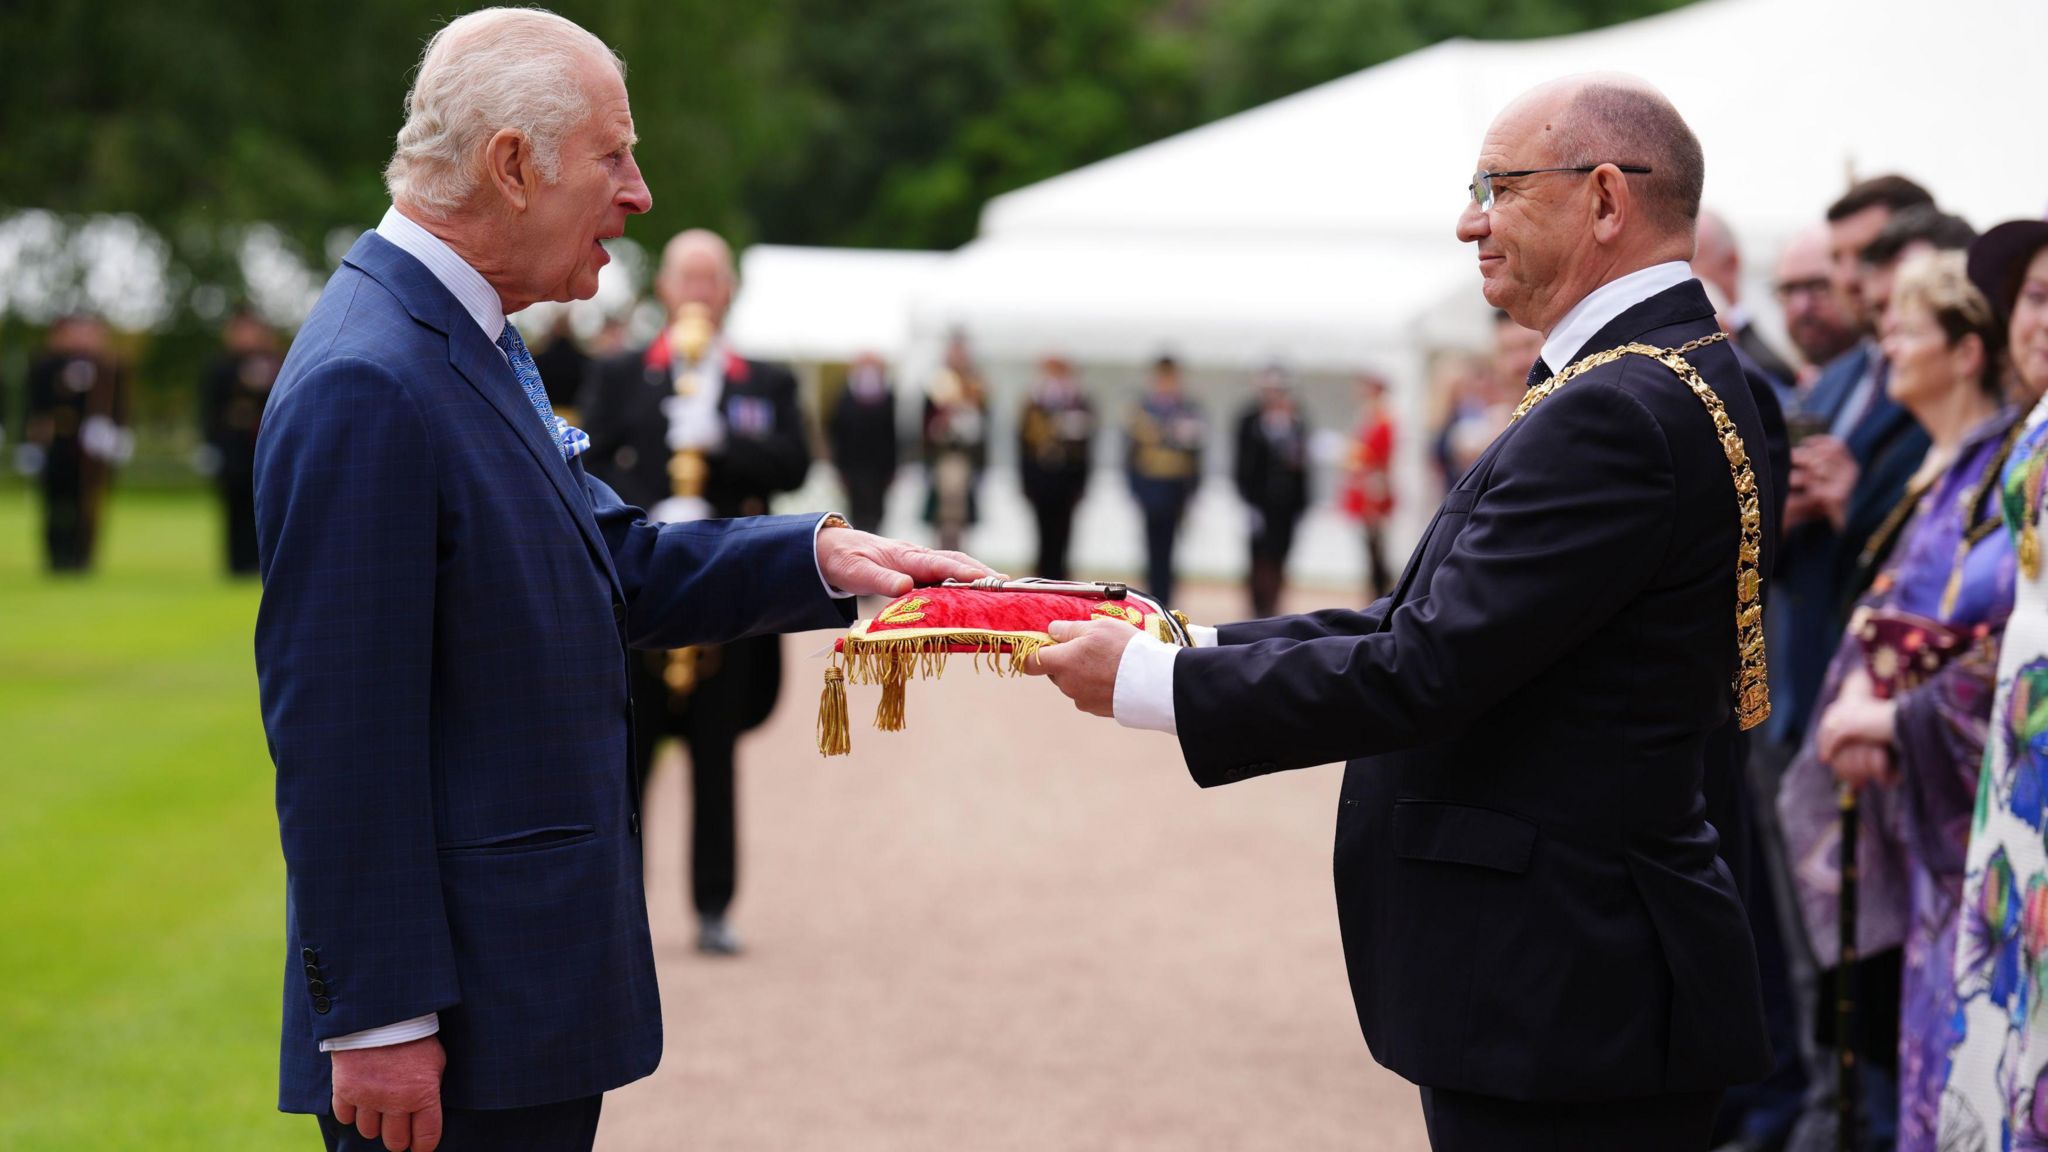 King Charles III takes part in the Ceremony of the Keys